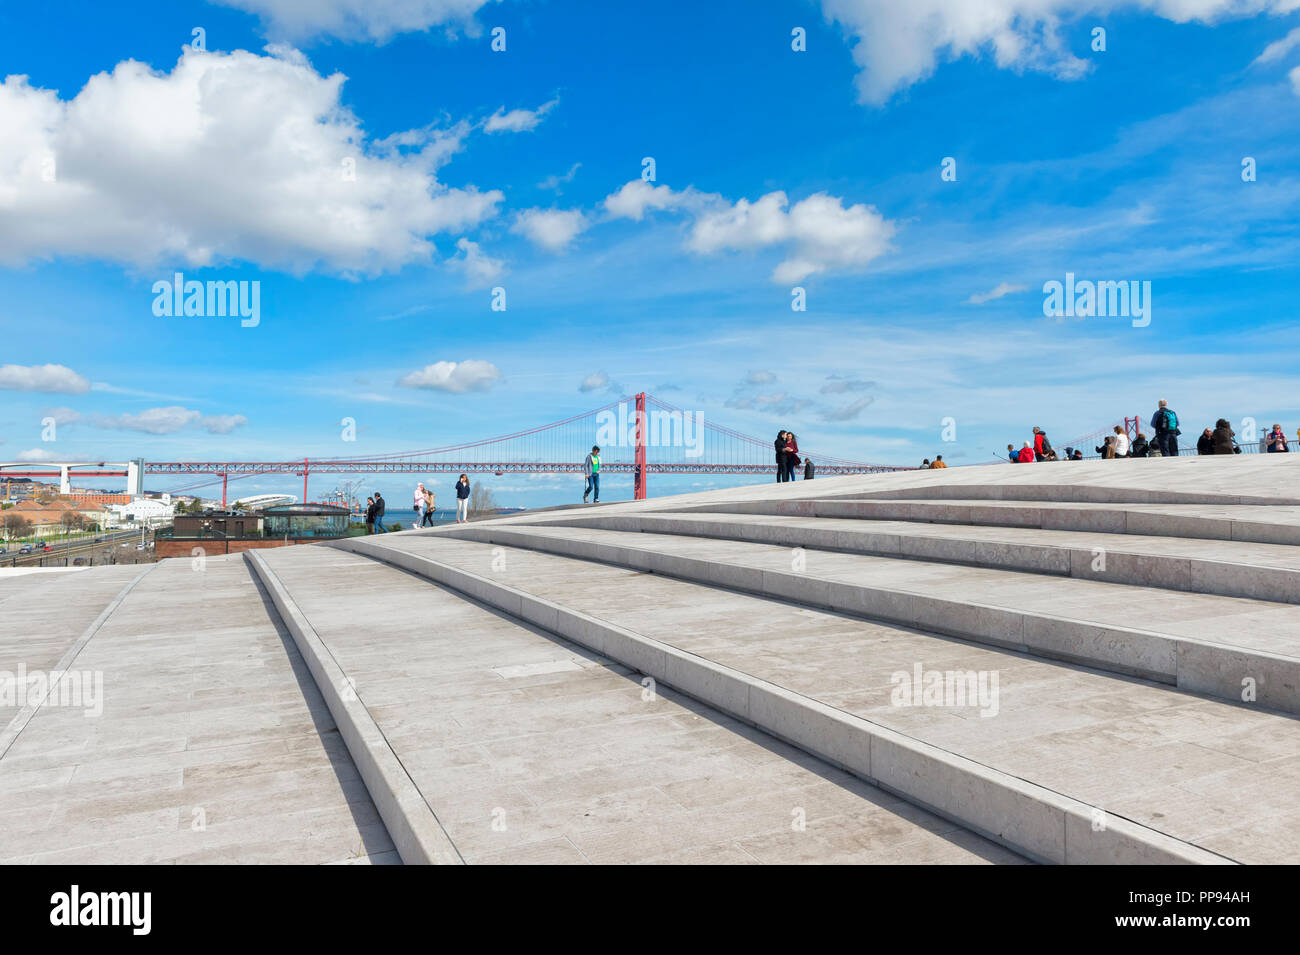 25 April Bridge, former Salazar bridge, over the Tagus river viewed from the top of the MAAT, Museum of Art Architecture and Technology, Lisbon, Portu Stock Photo